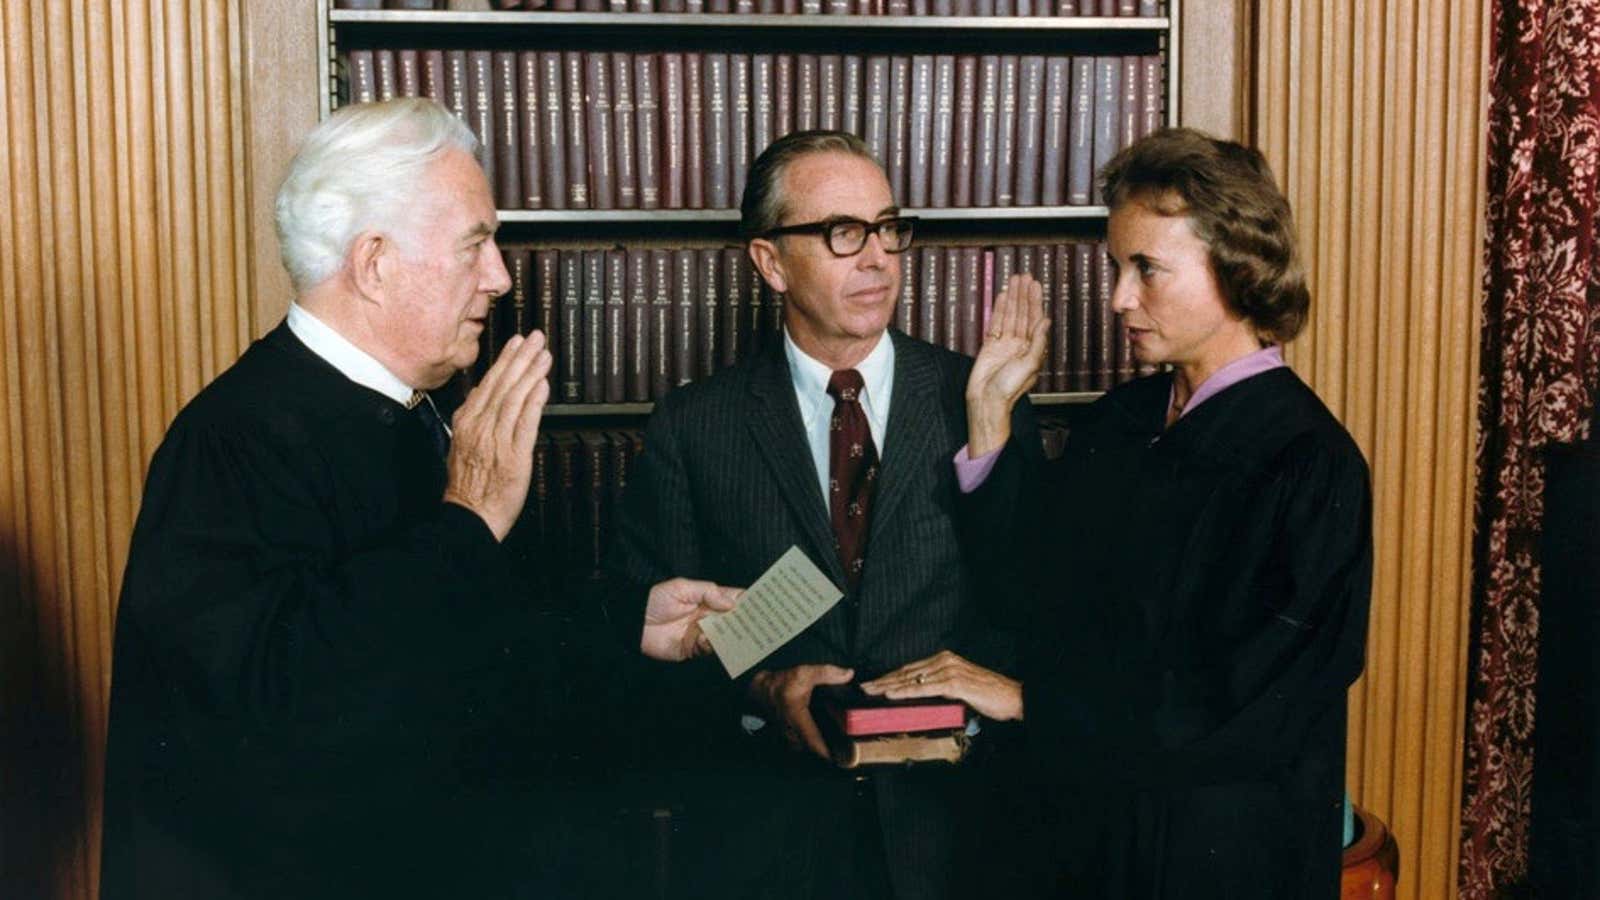 The “young cowgirl” who became the first woman US Supreme Court justice.